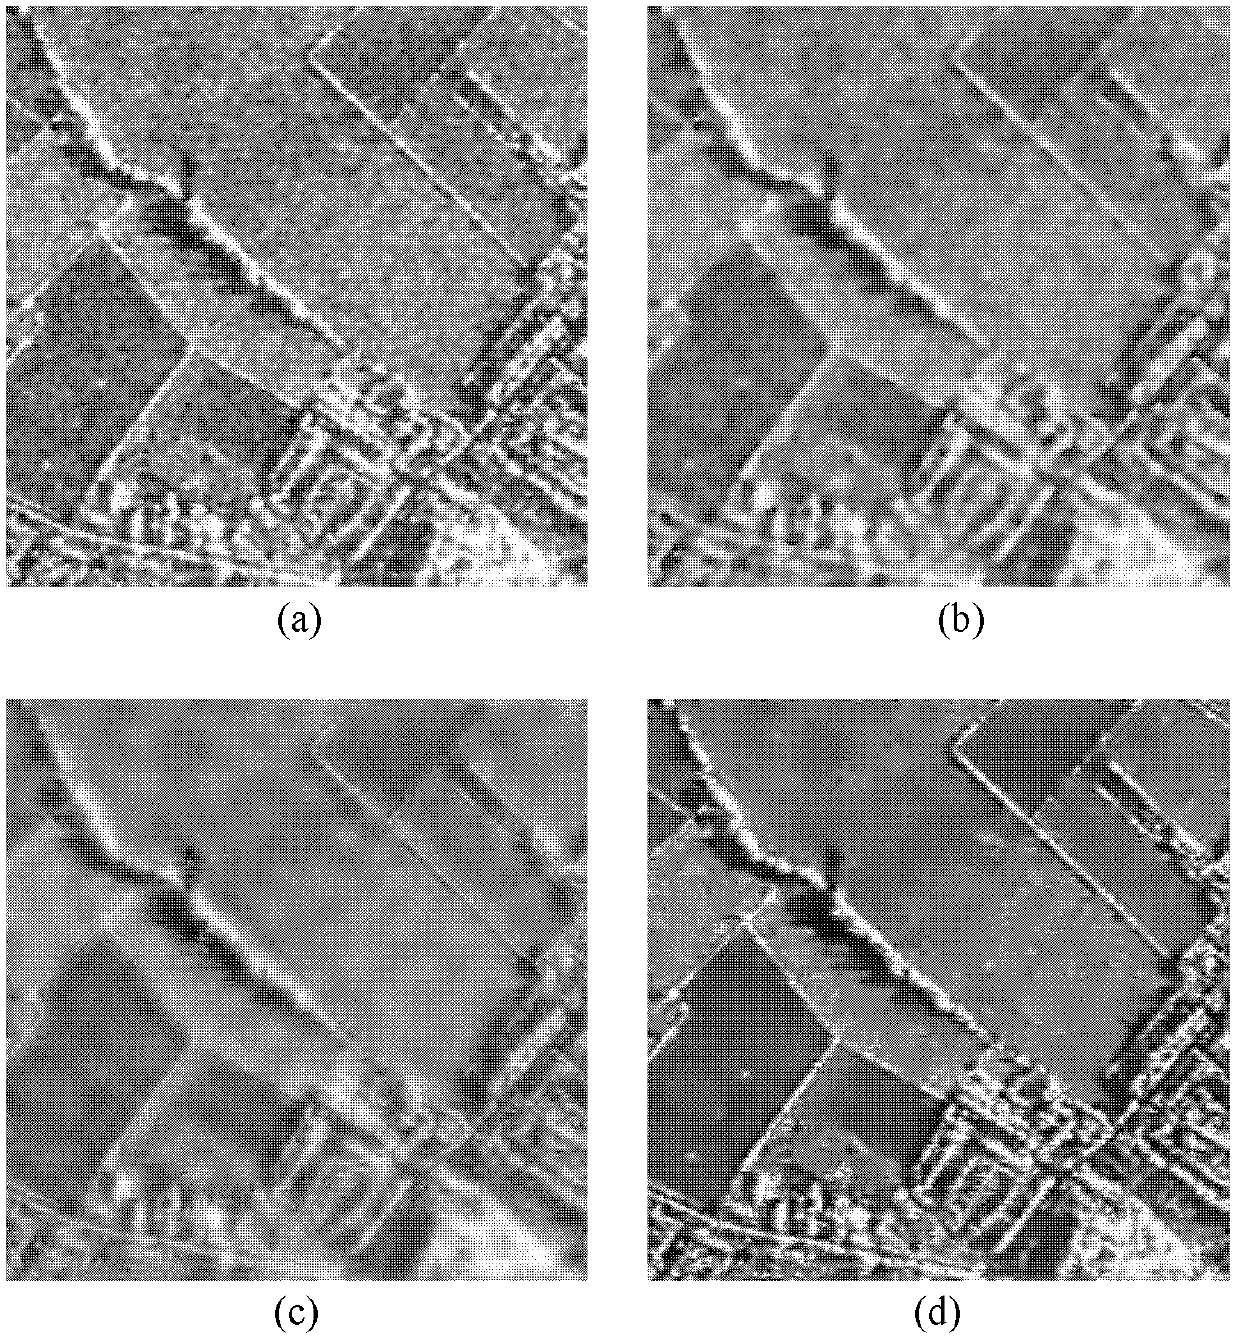 SAR image speckle suppression method based on dictionary learning in wavelet domain